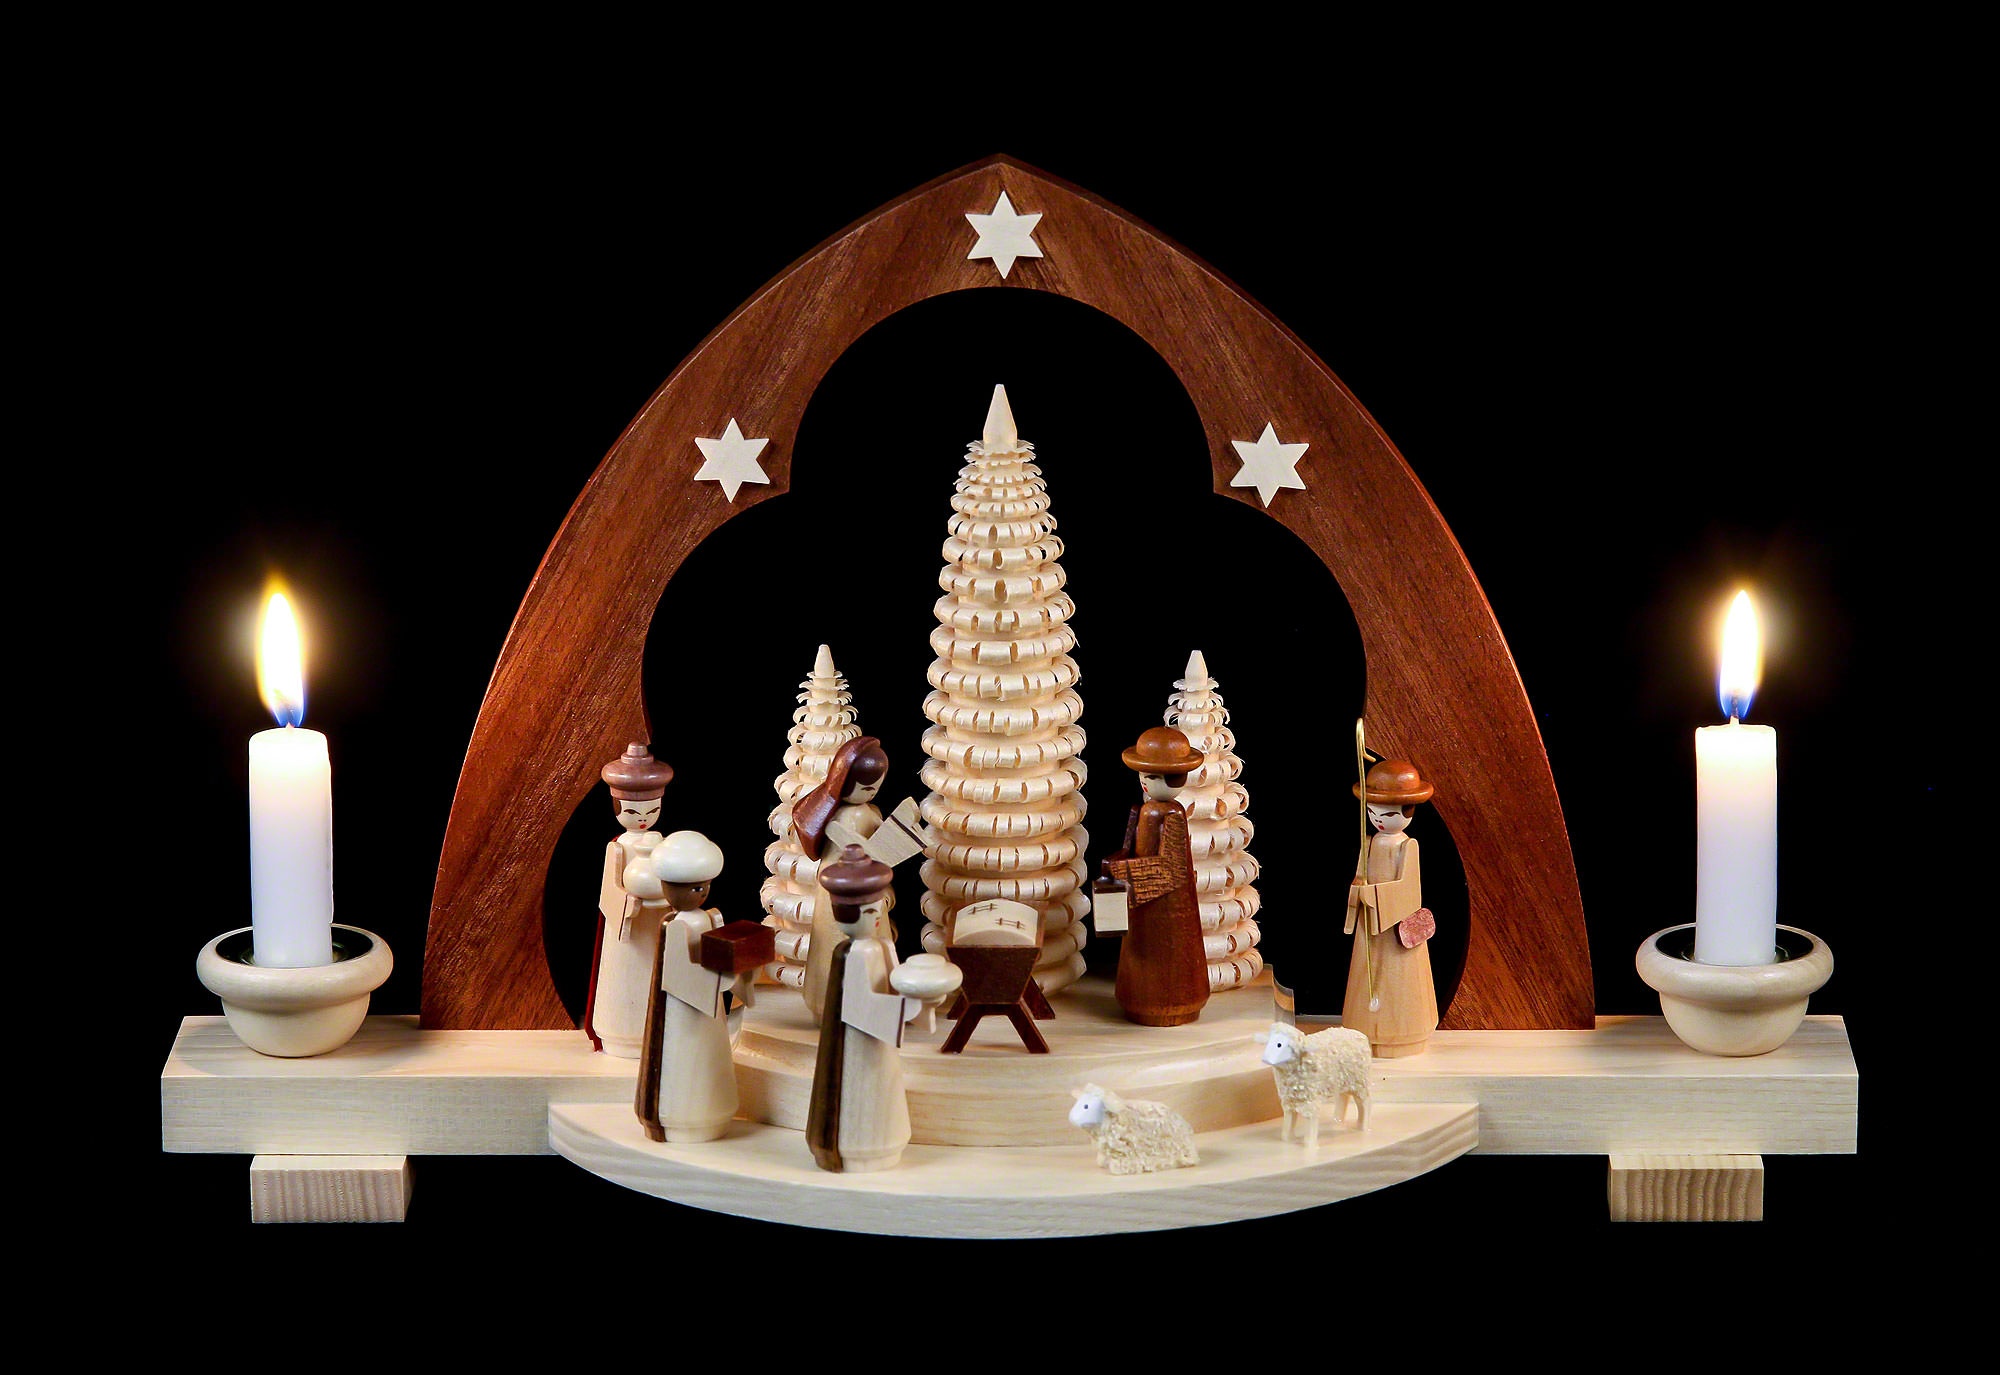 Candle Arch - Nativity Scene (30 cm/12in) by Müller Kleinkunst